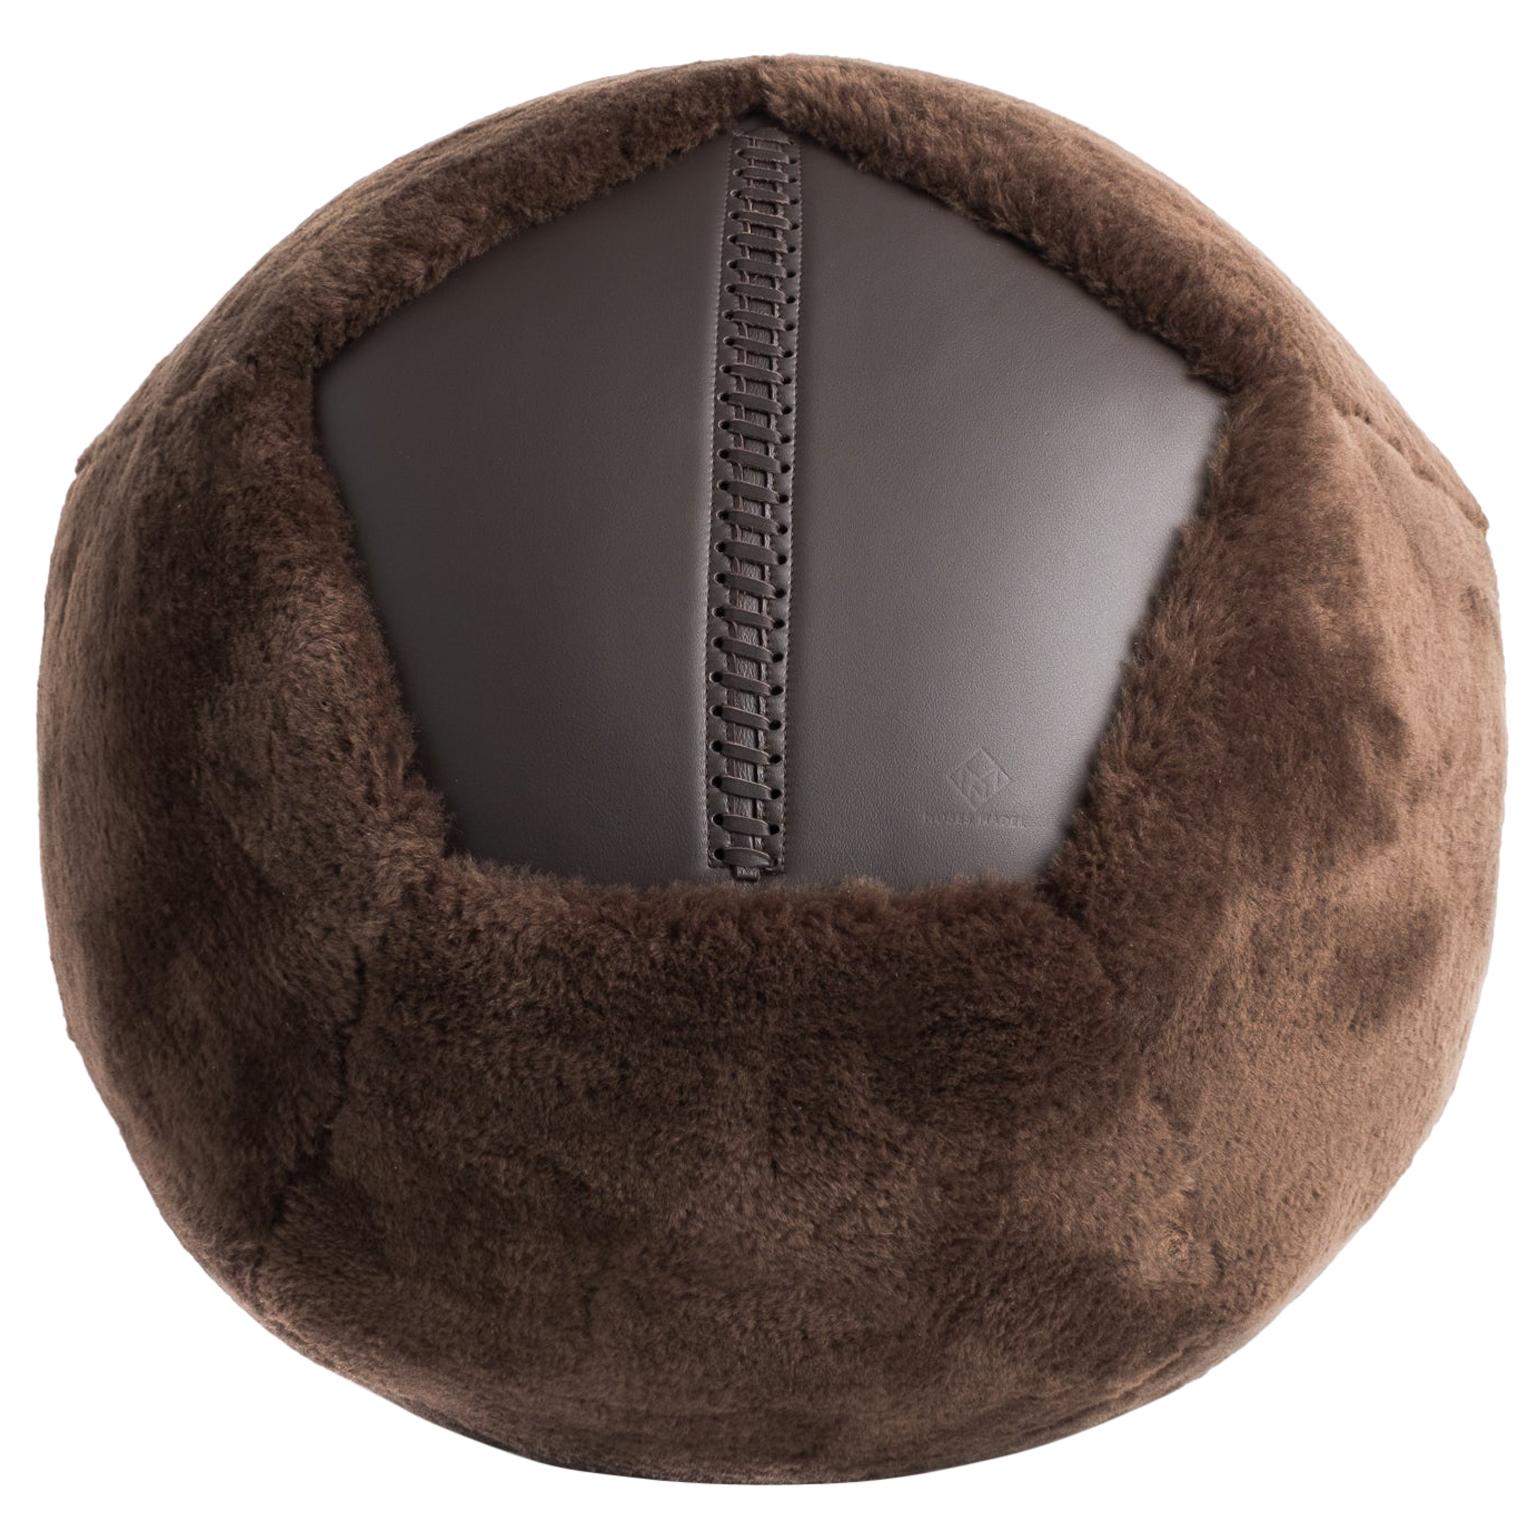 Ottoman X 22"Ø in Chocolate Brown Shearling by Moses Nadel